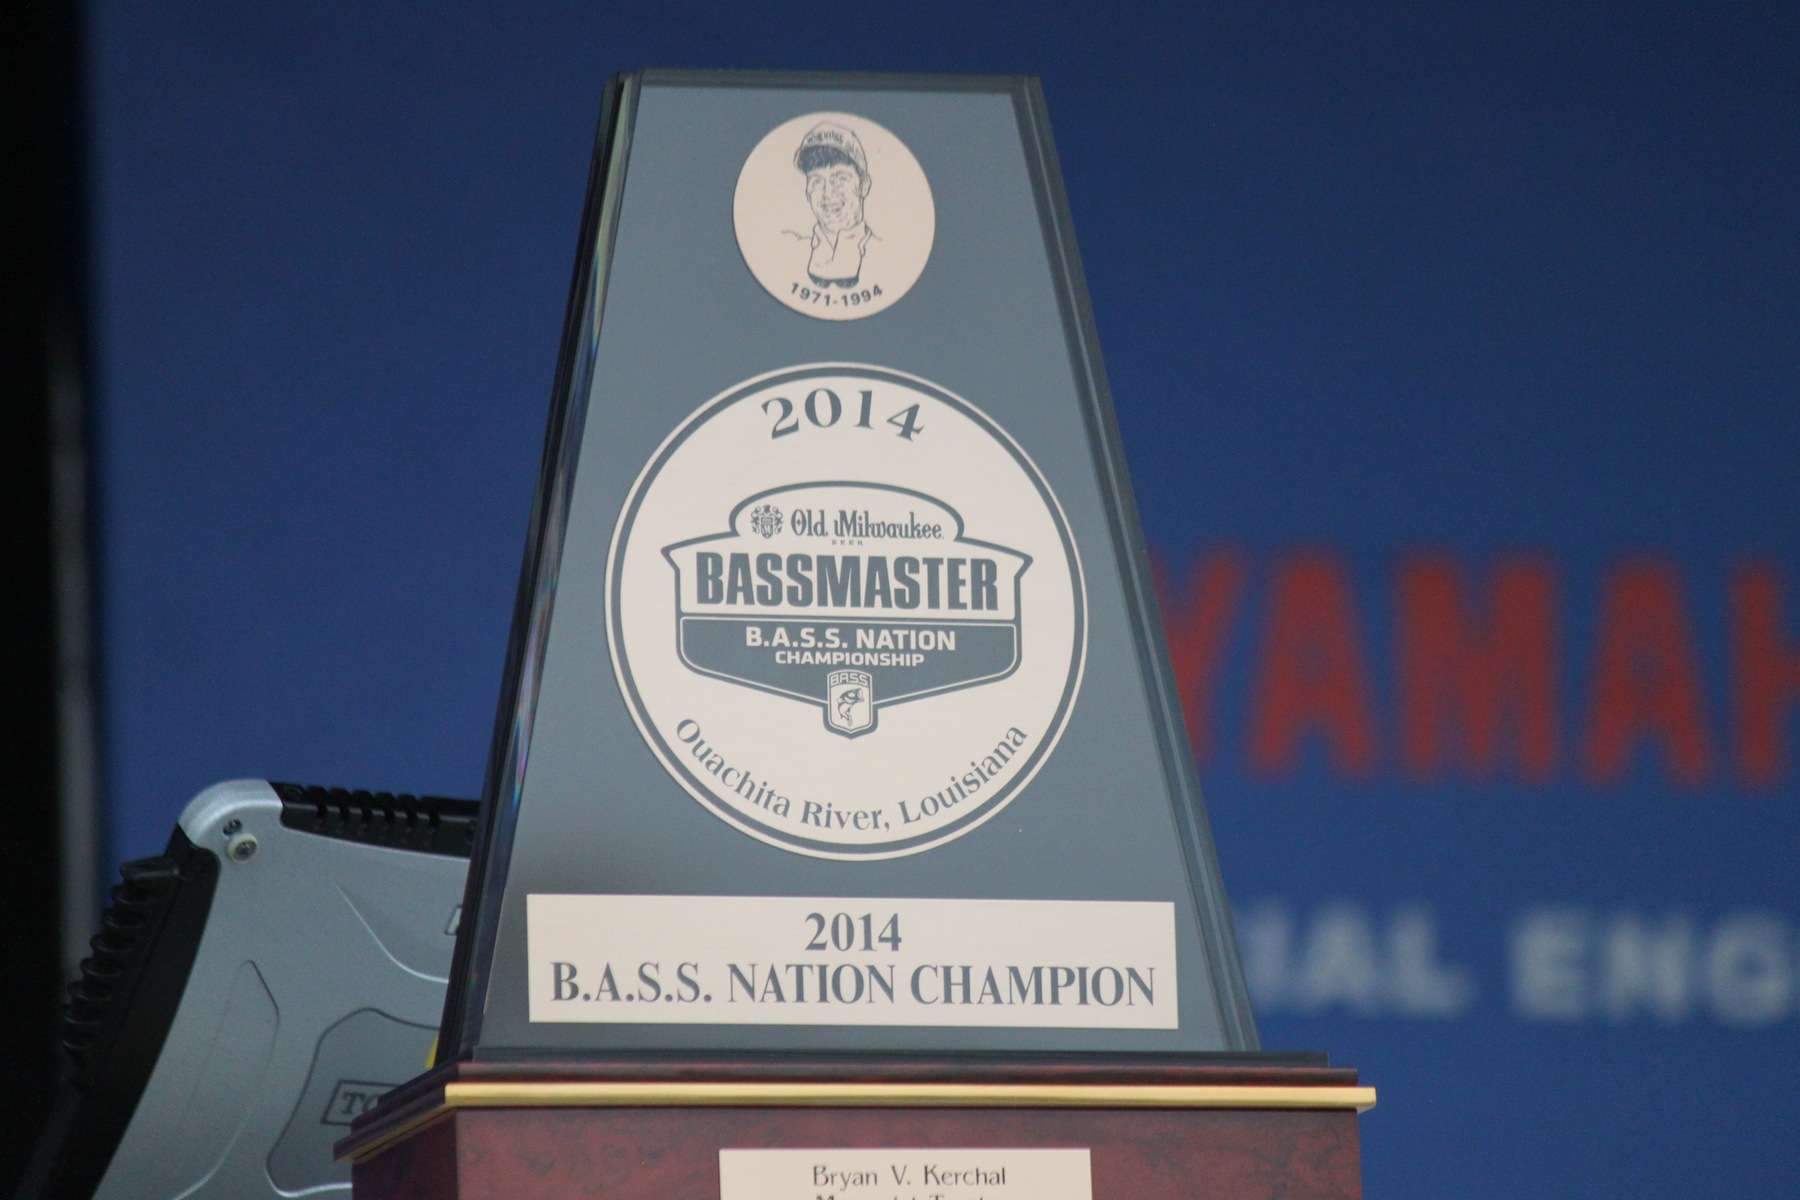 The final day weigh-in of the 2014 Old Milwaukee B.A.S.S. Nation Championship gets underway. 